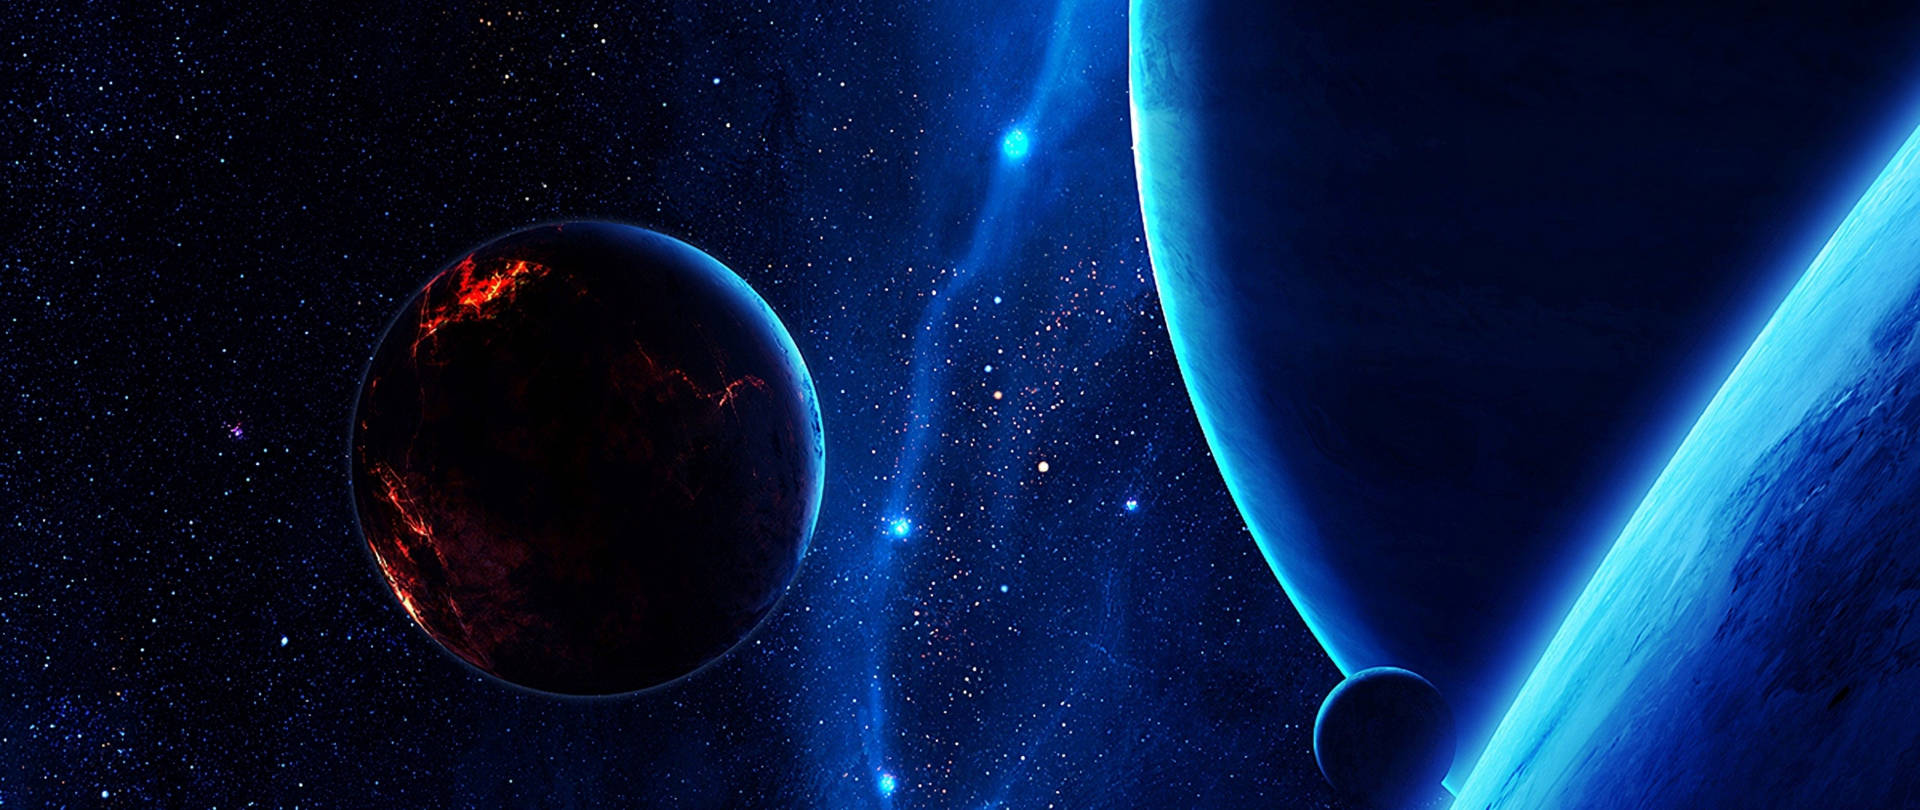 4k Ultra Hd Planets Background